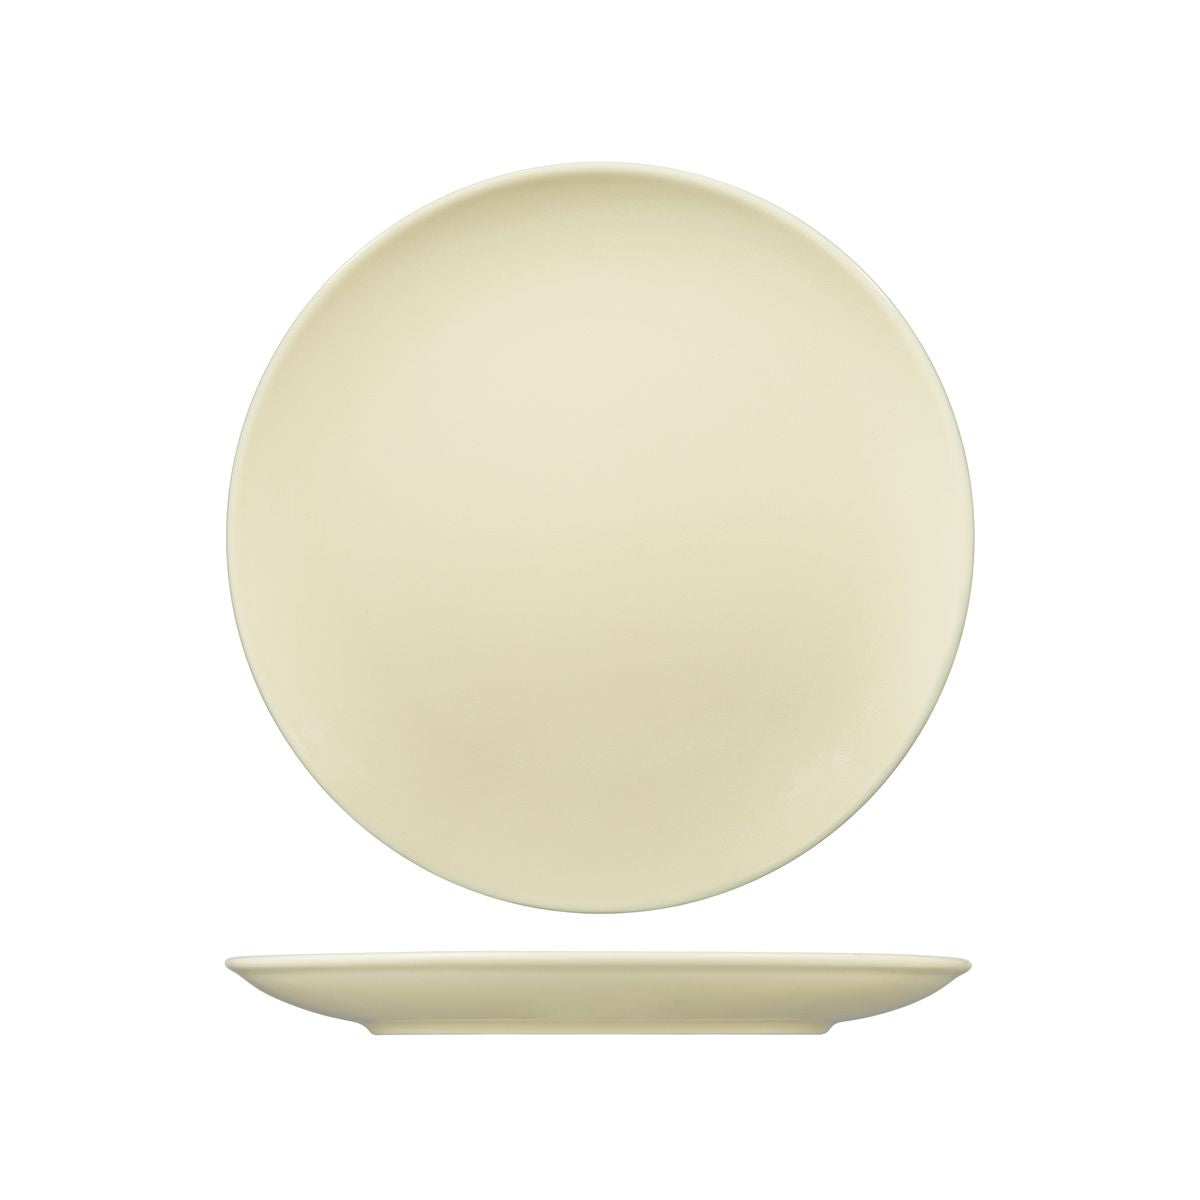 Round Coupe Plate - Pearly, 270Mm, Vintage from Rak Porcelain. made out of Porcelain and sold in boxes of 12. Hospitality quality at wholesale price with The Flying Fork! 